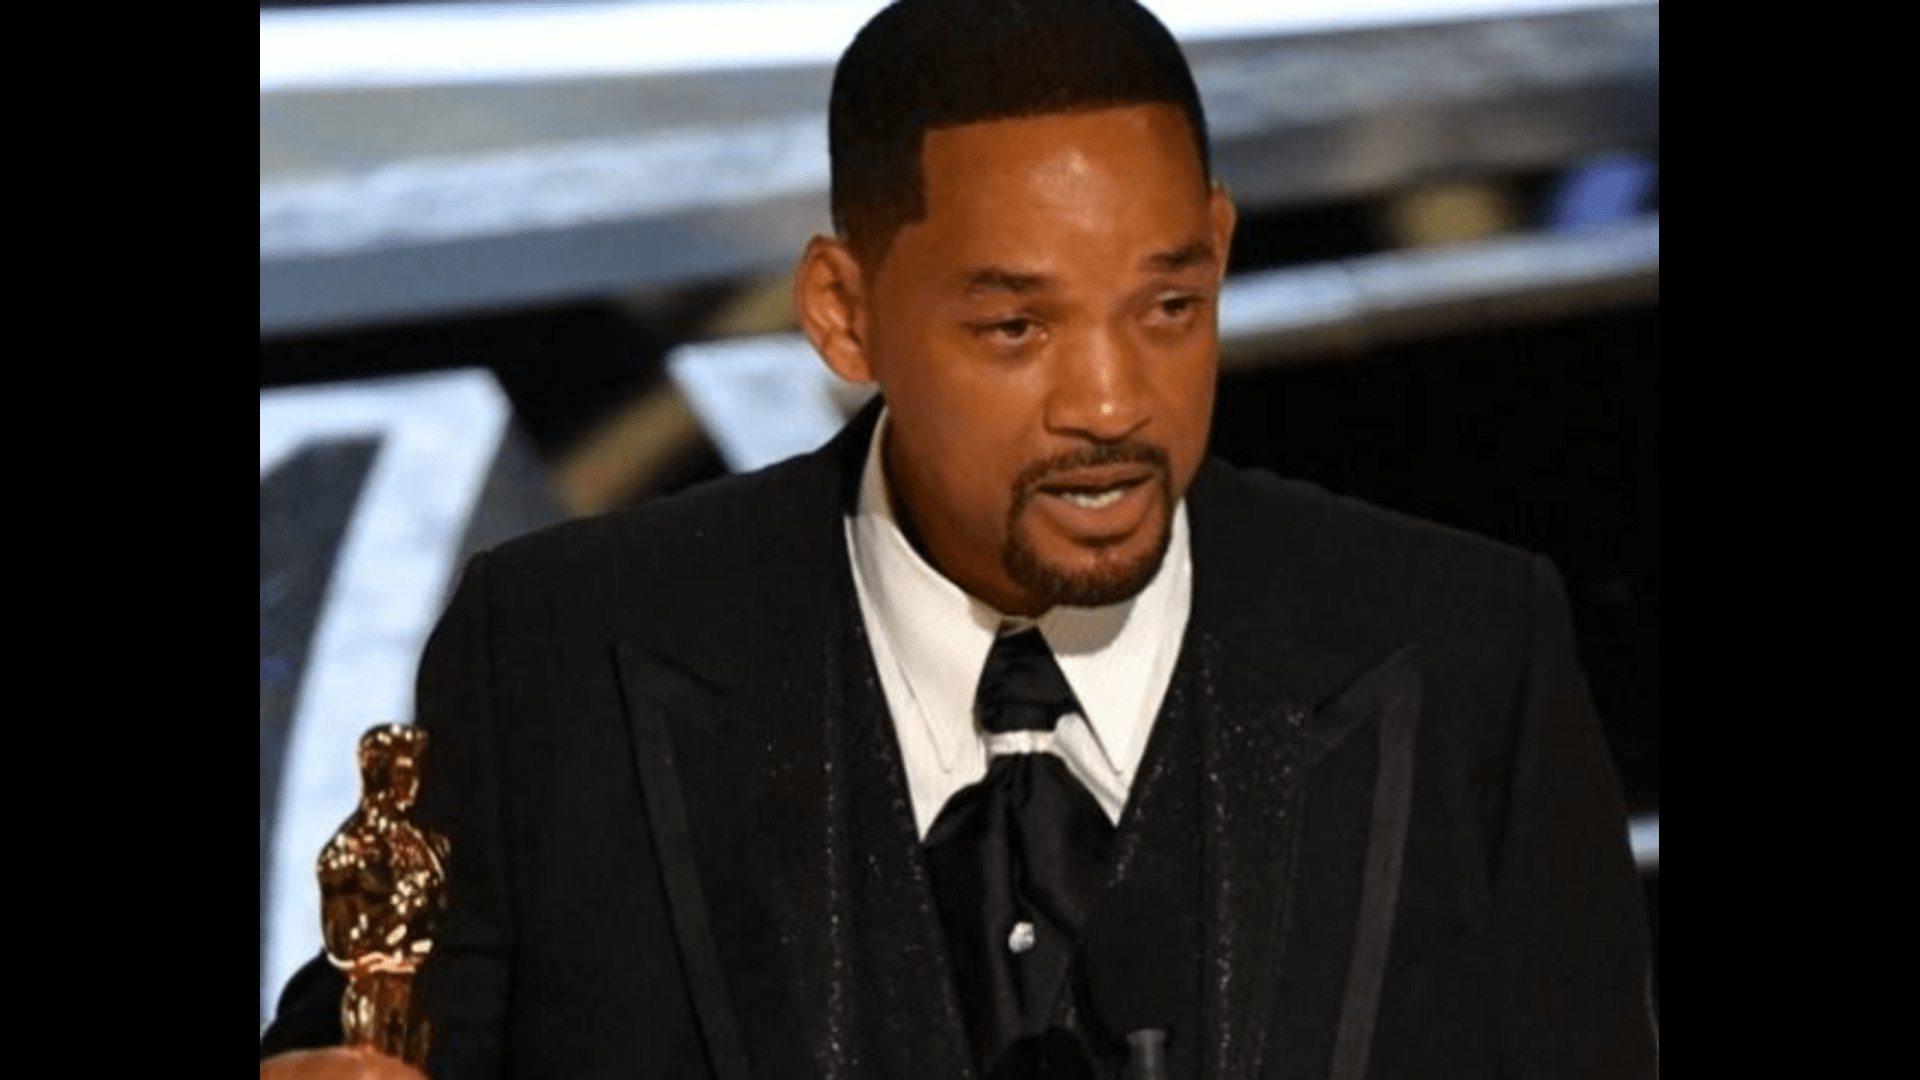 ”will-smith-resigns-from-the-academy-after-punching-chris-rock-at-the-oscars”